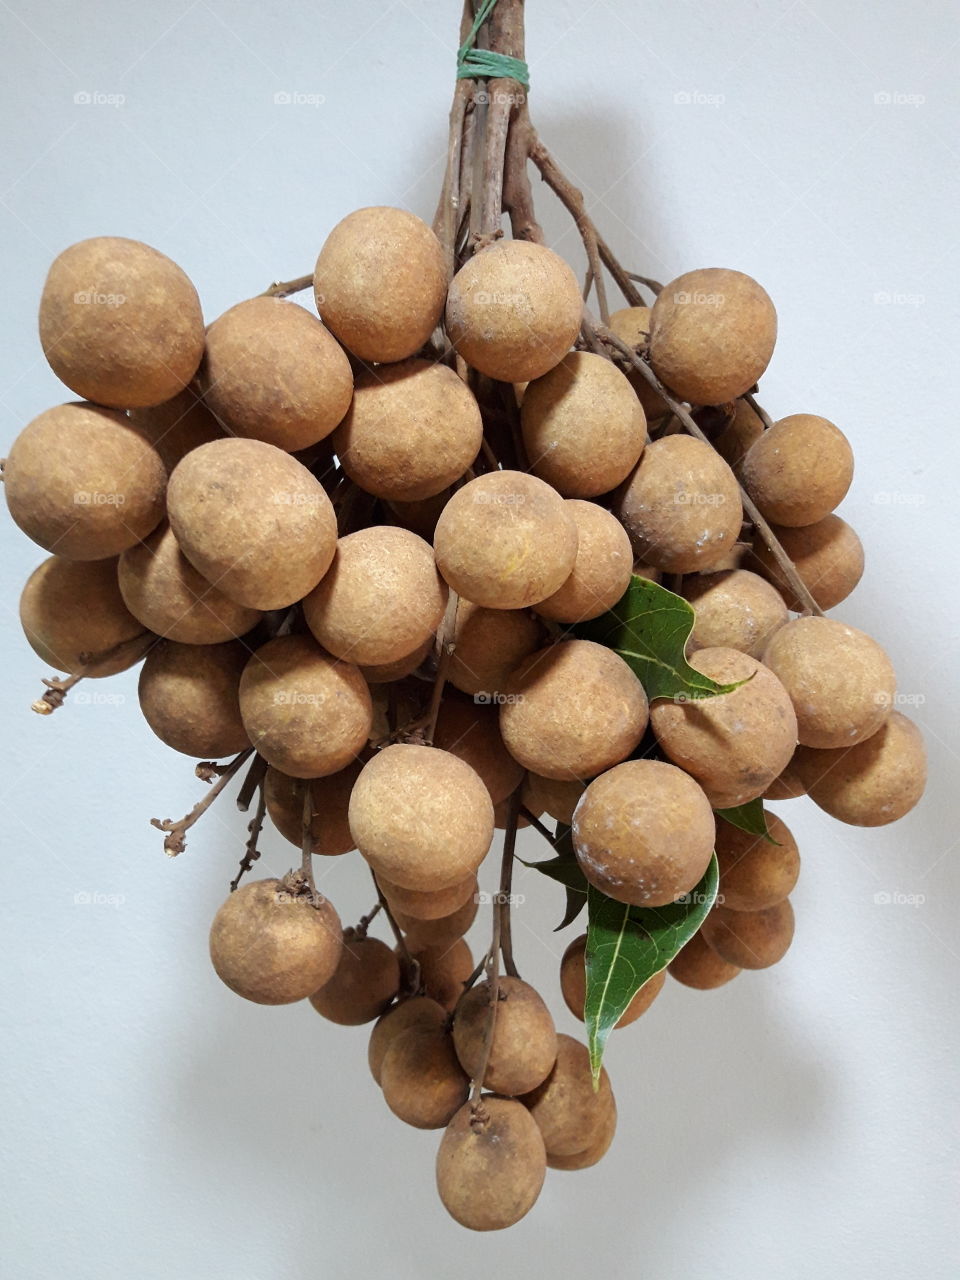 A bunch of longan fruit. Recent studies have evaluated  it as an anti-inflammatory, a memory enhancer and for anti-cancer effects.